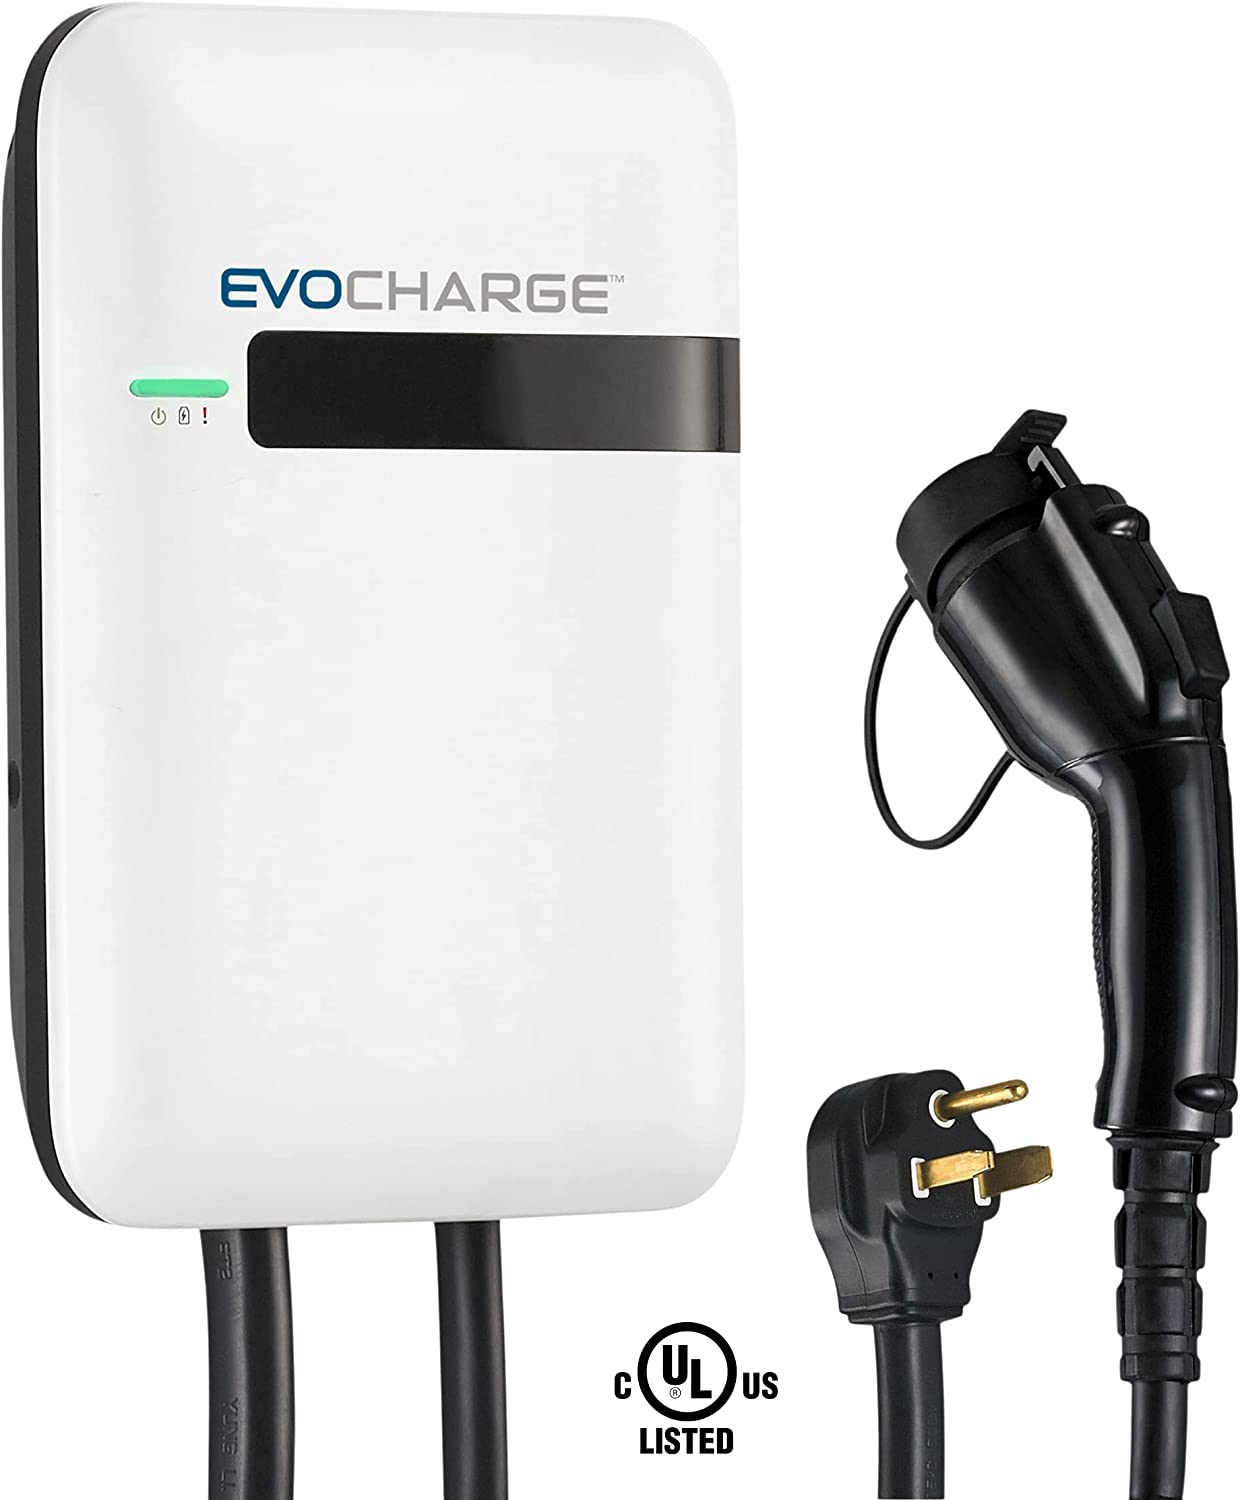 Charge up to 8X Faster Than Level 2 UL Listed EV Charger NEMA 6-50 Plug Indoor/Outdoor Rated Level 2 WiFi Electric Vehicle Charging Station 25 ft Cable EVoCharge iEVSE Cloud Network 240V 32A 